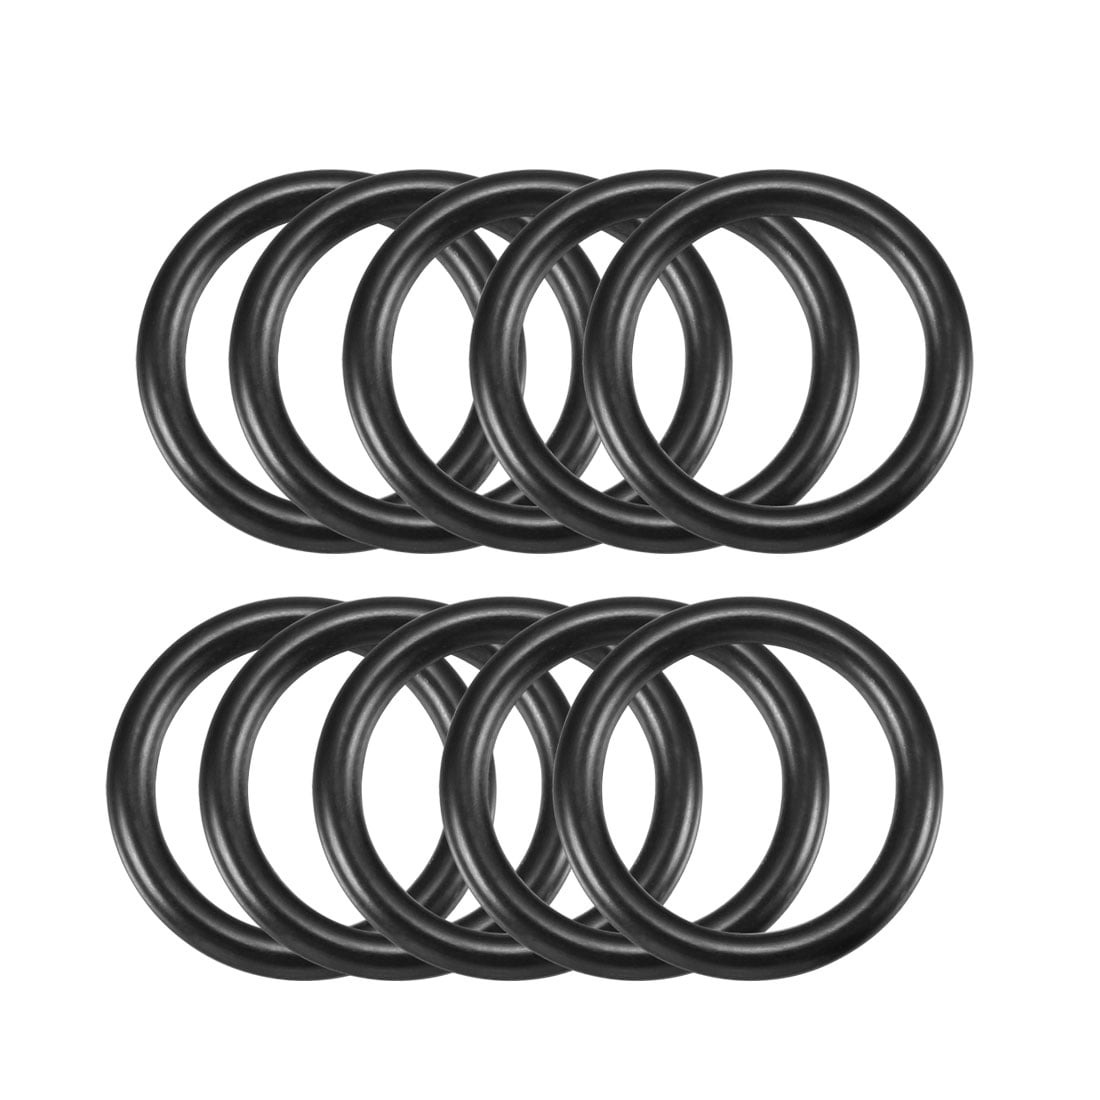 Uxcell 10 Pcs Black Rubber 40Mm x 2.5Mm Oil Seal O Rings Gaskets Washers 